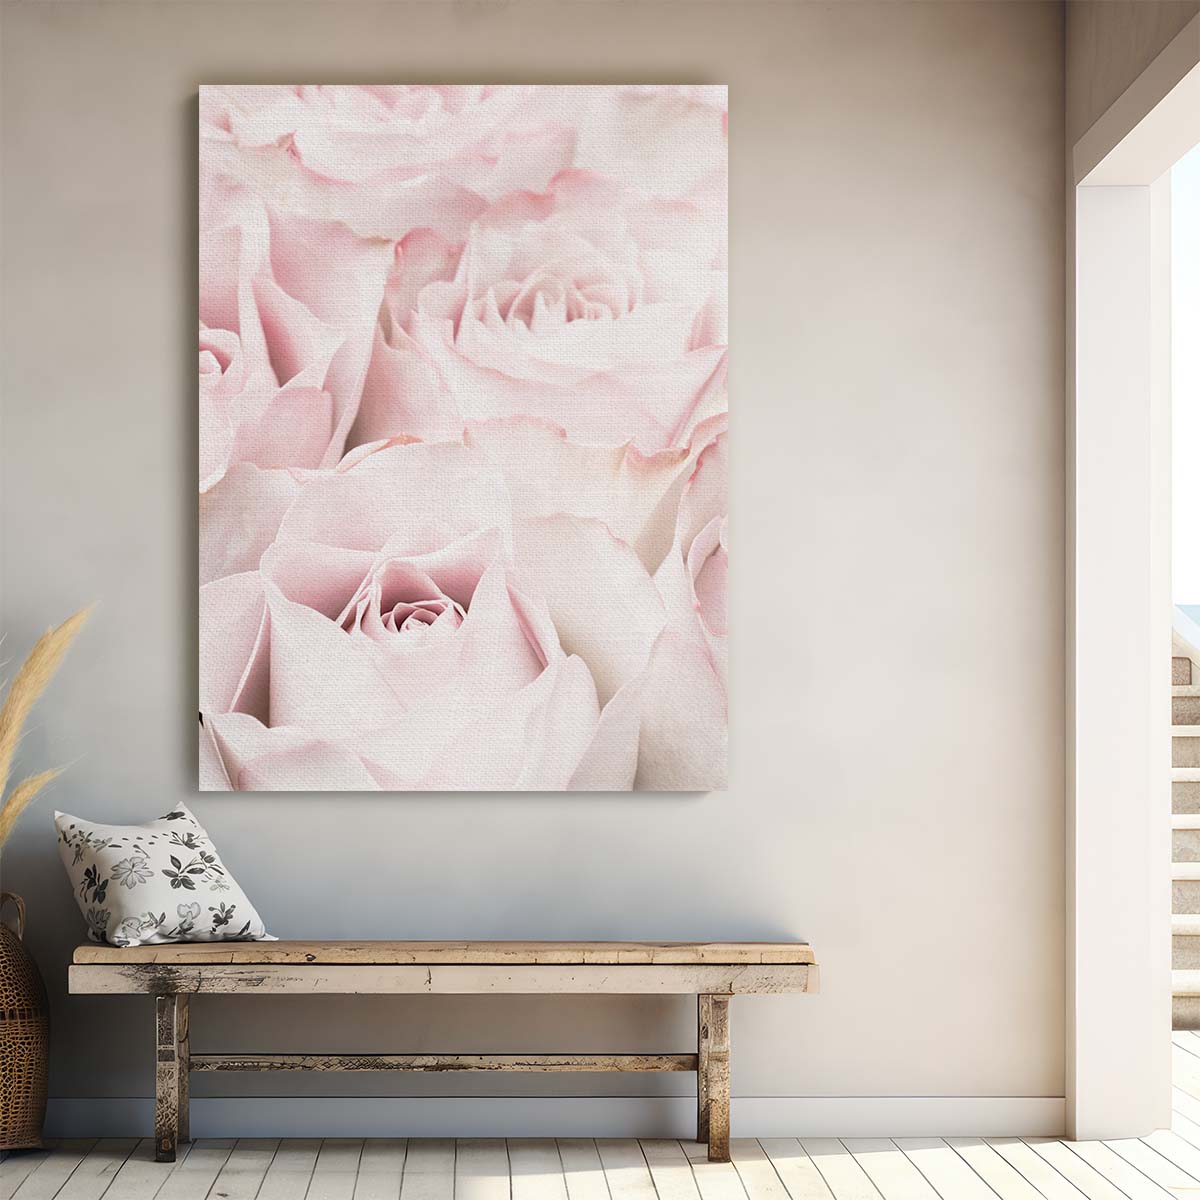 Pastel Pink Roses Macro Photography - Detailed Botanical Still Life Art by Luxuriance Designs, made in USA